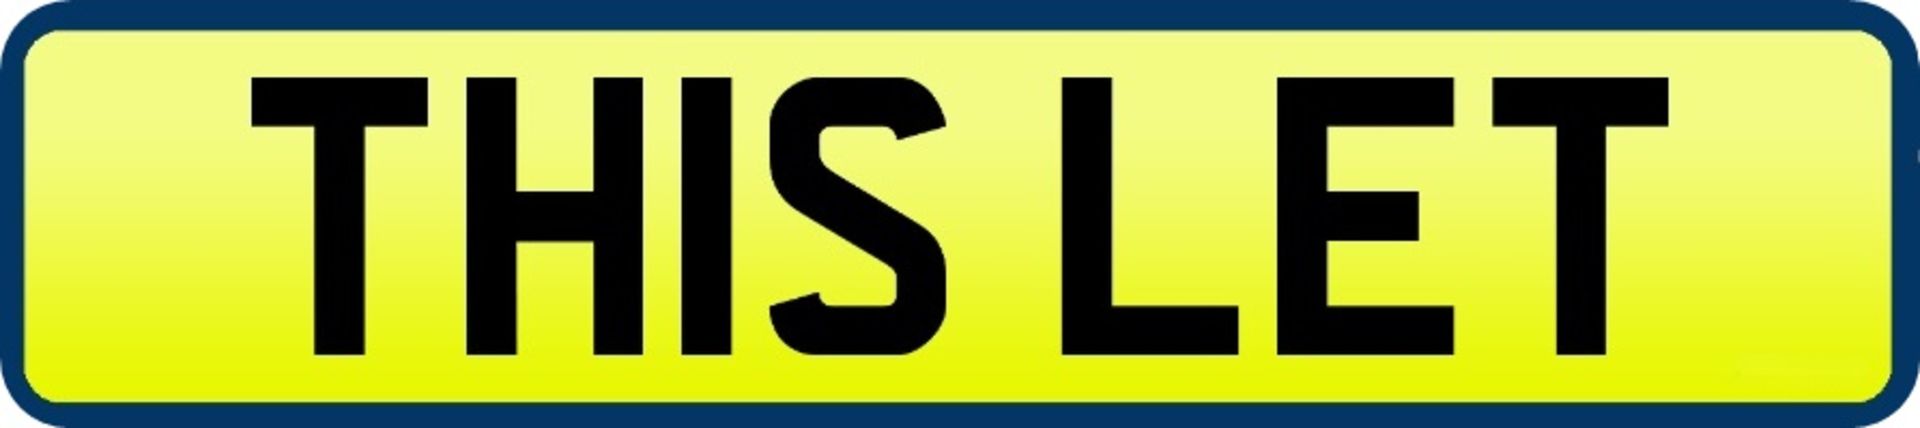 1 x Private Vehicle Registration Car Plate - TH15 LET - CL590 - Location: Altrincham WA14More